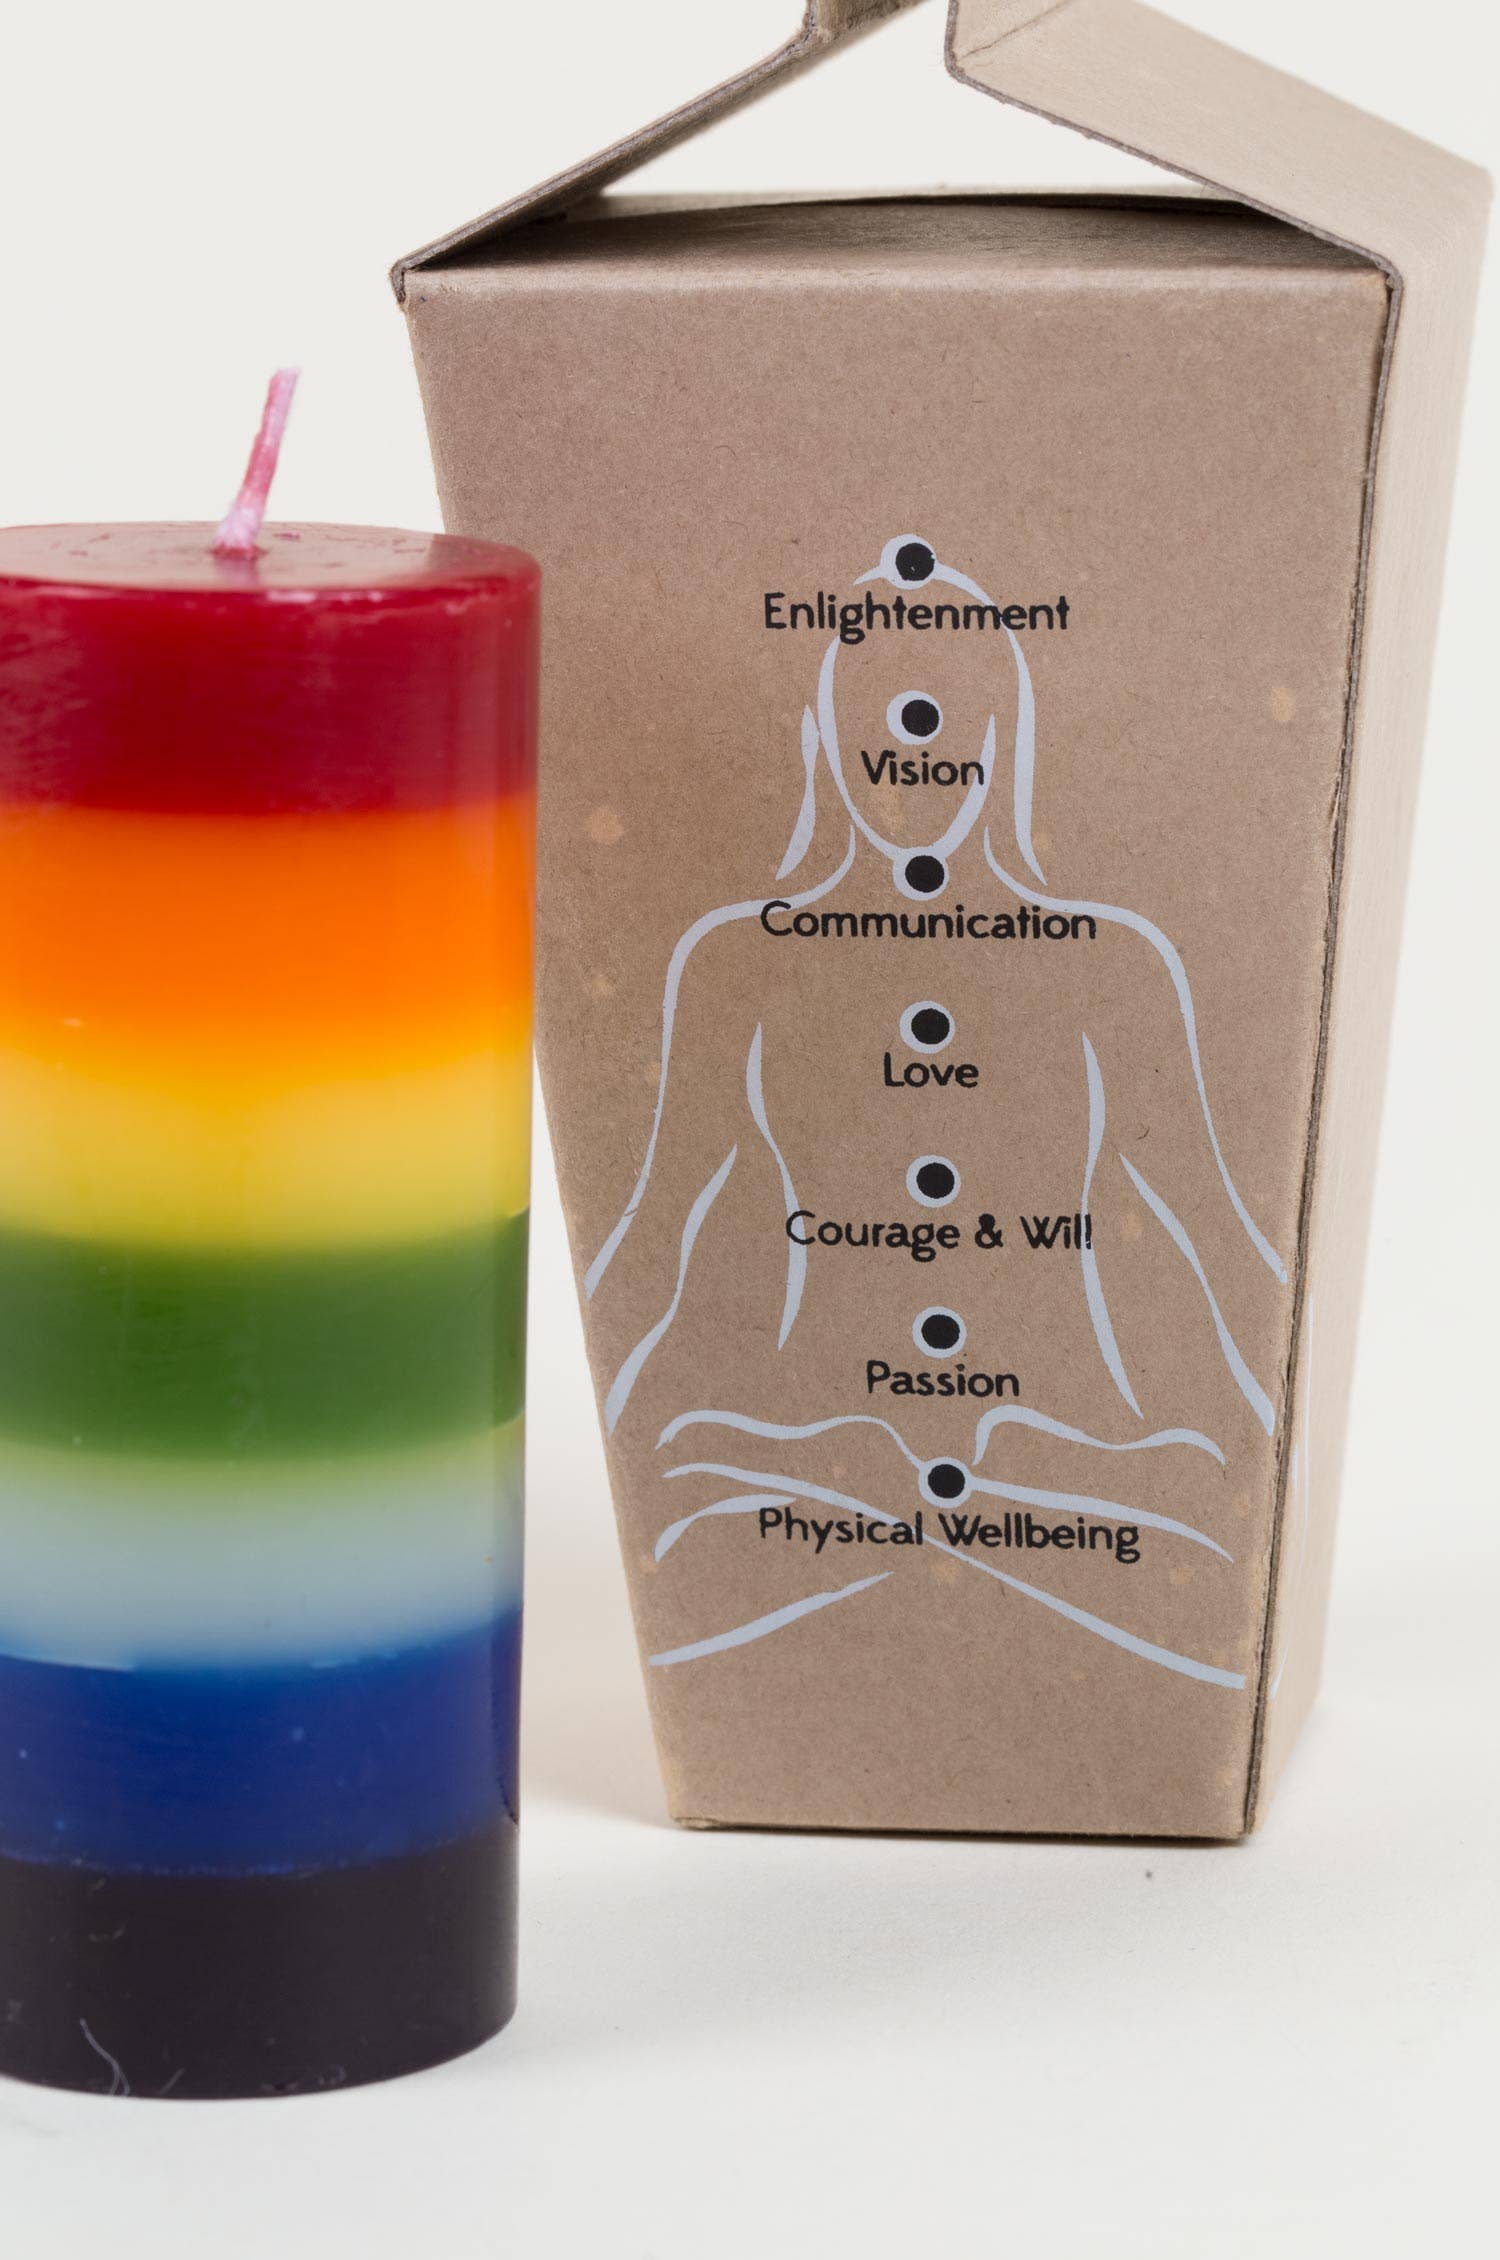 Chakra Candle (Unscented)